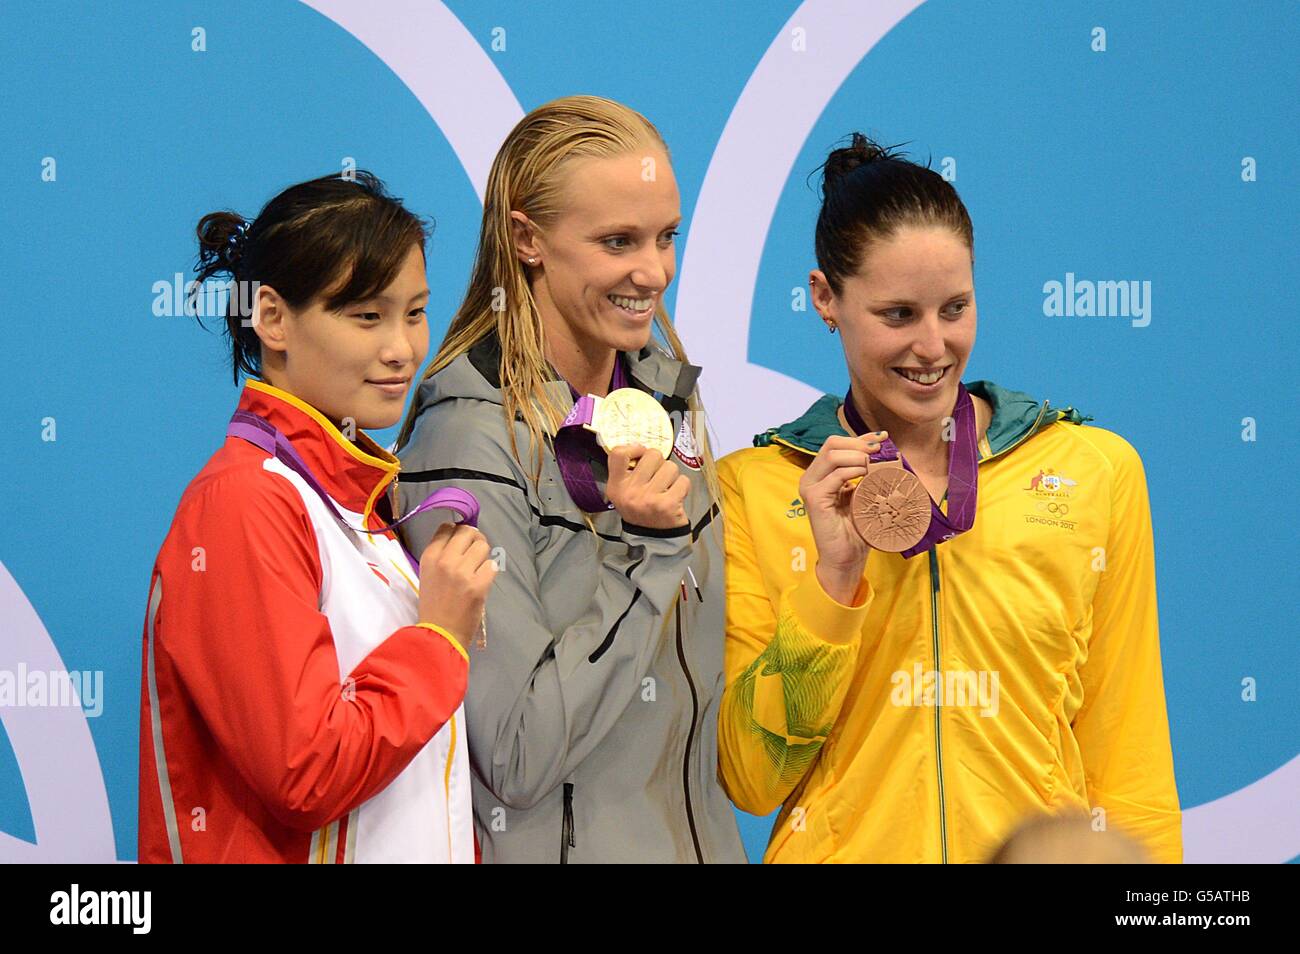 USA's gold medal winner Dana Vollmer (centre), China's silver medal winner Ying Lu (left) and Australia's bronze medal winner Alicia Coutts (right) celebrate after the Women's 100m Butterfly Final Stock Photo